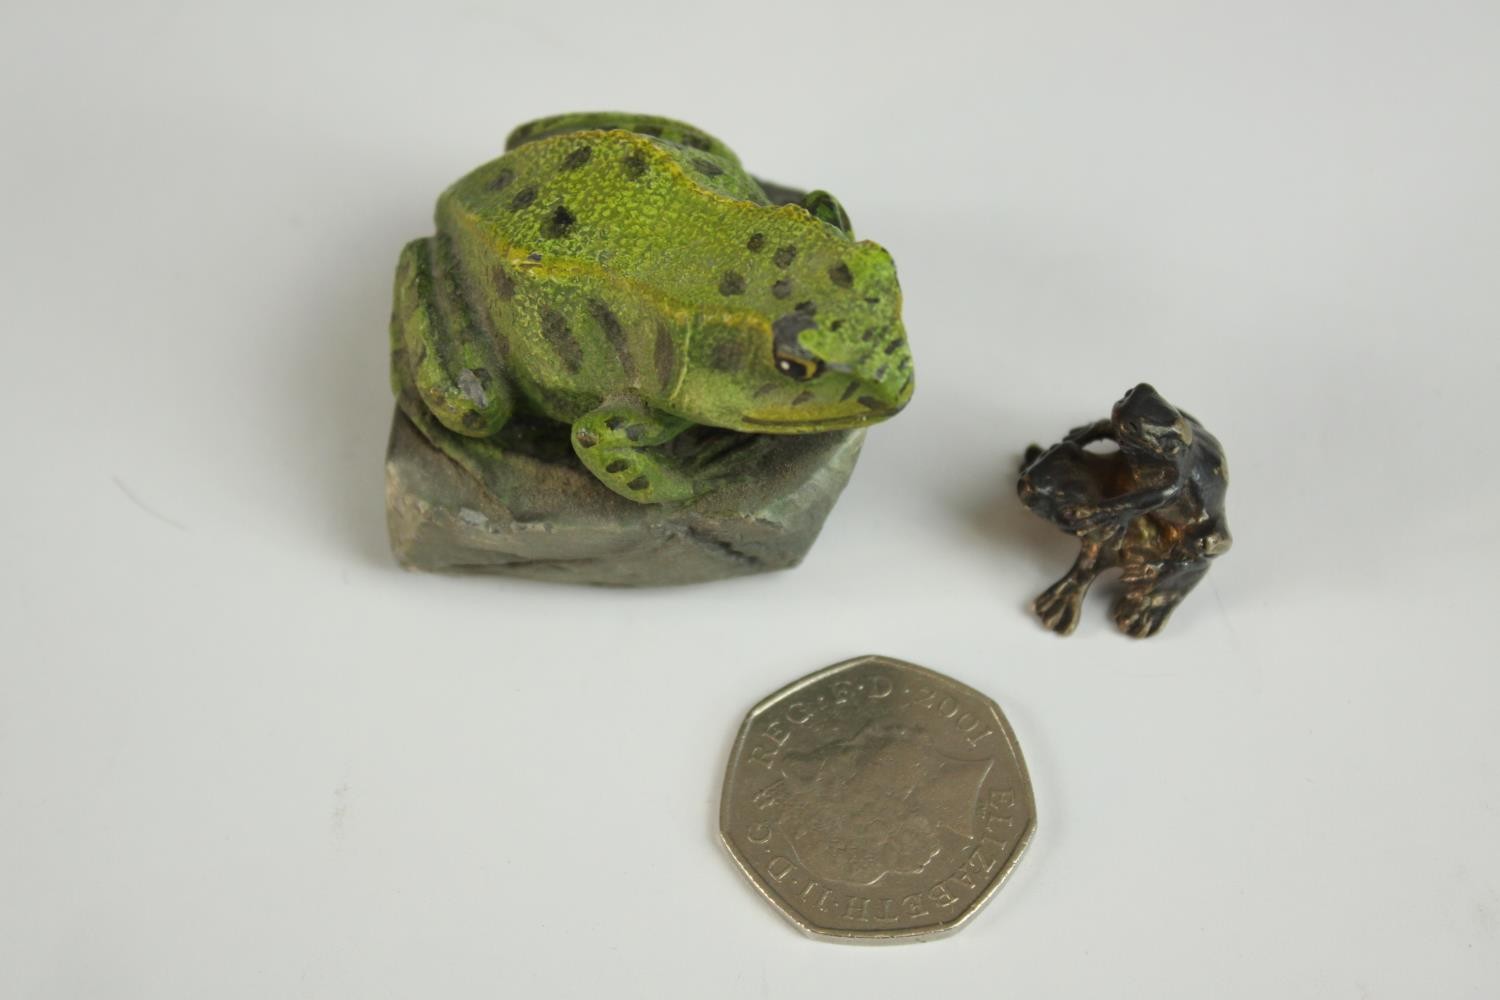 A pair of mating silver frogs along with a painted pewter frog on a rock. H.4cm. (largest) - Image 2 of 11